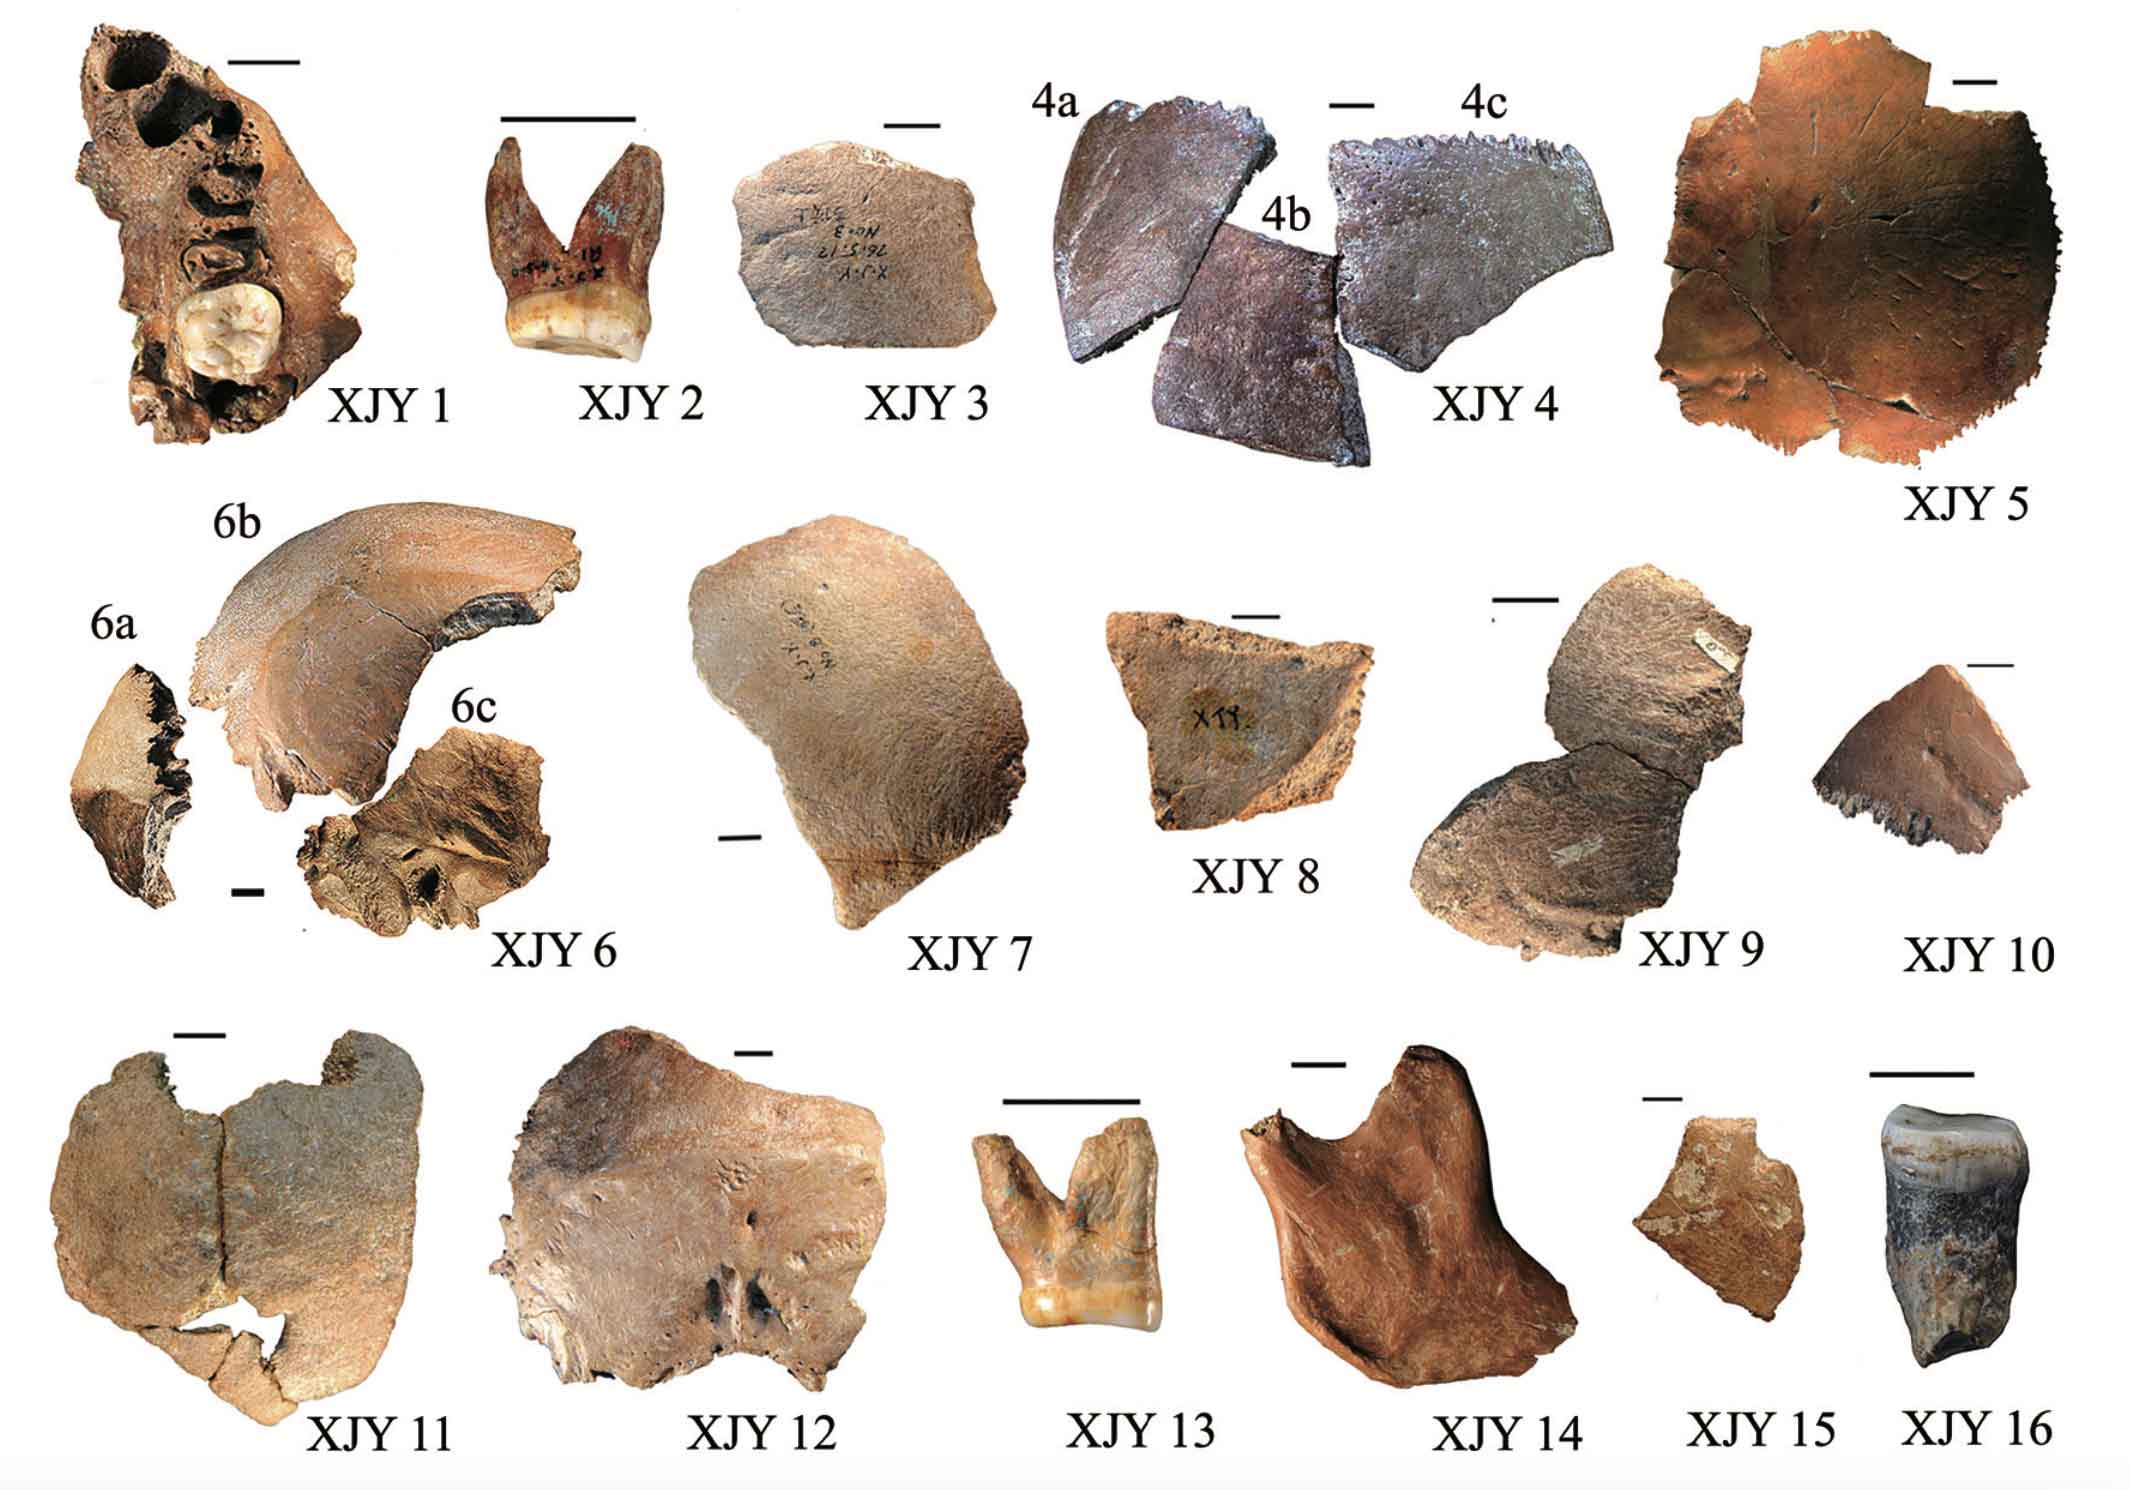 Image with 16 fragmentary fossils from Xujiayao